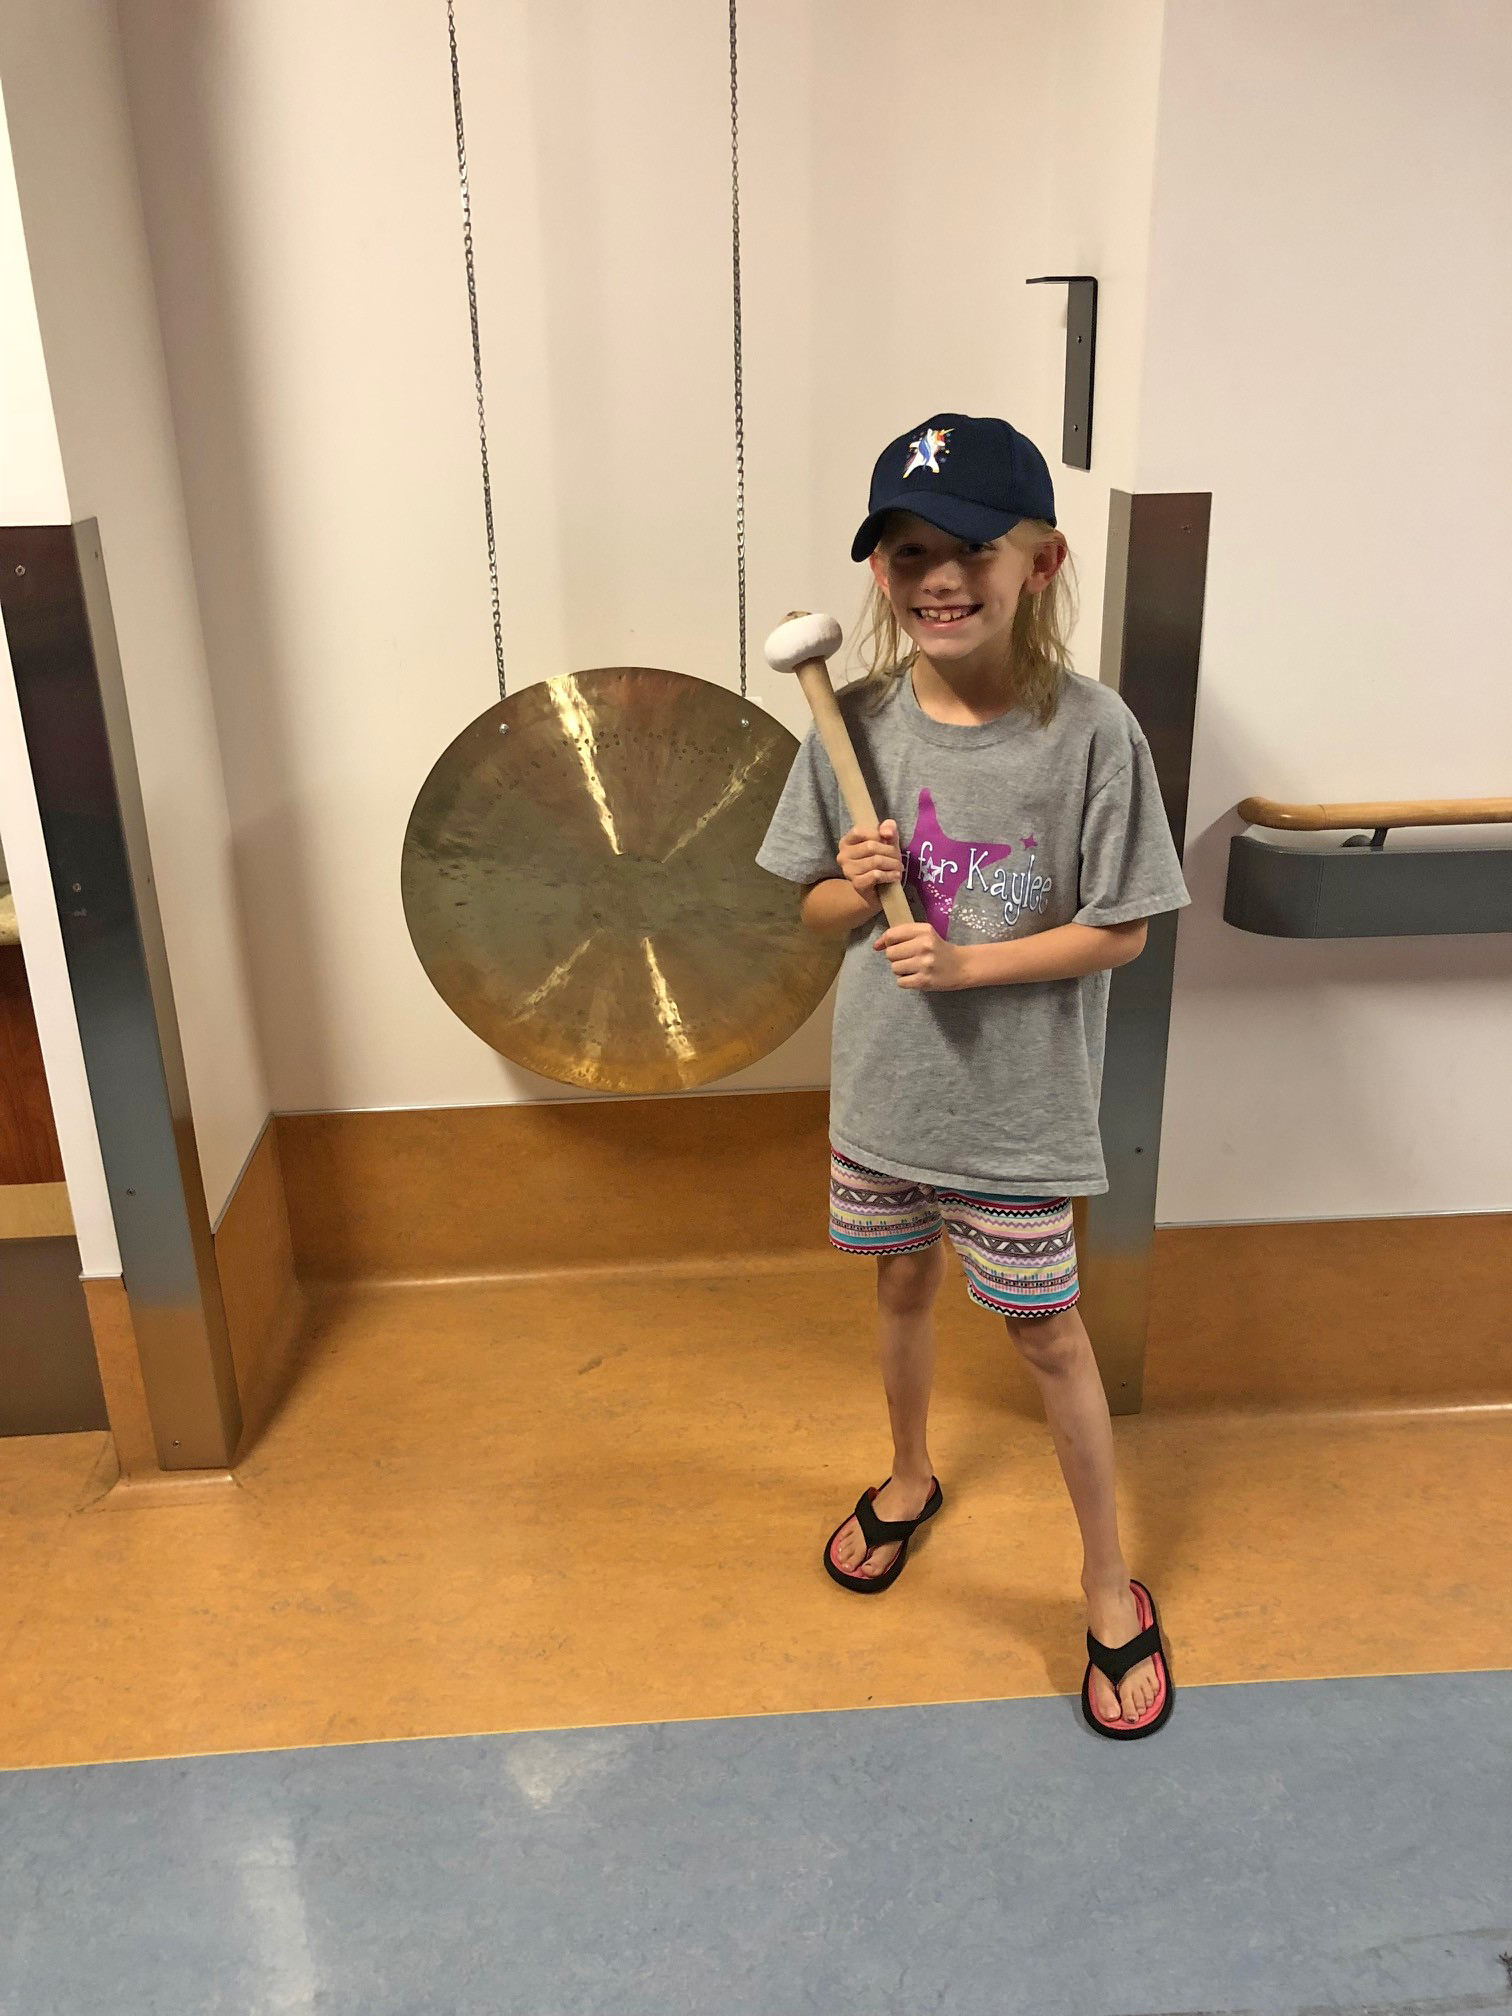 PHOTO: Kaylee Kruise stands in front of the gong at UPMC Children's Hospital of Pittsburgh.